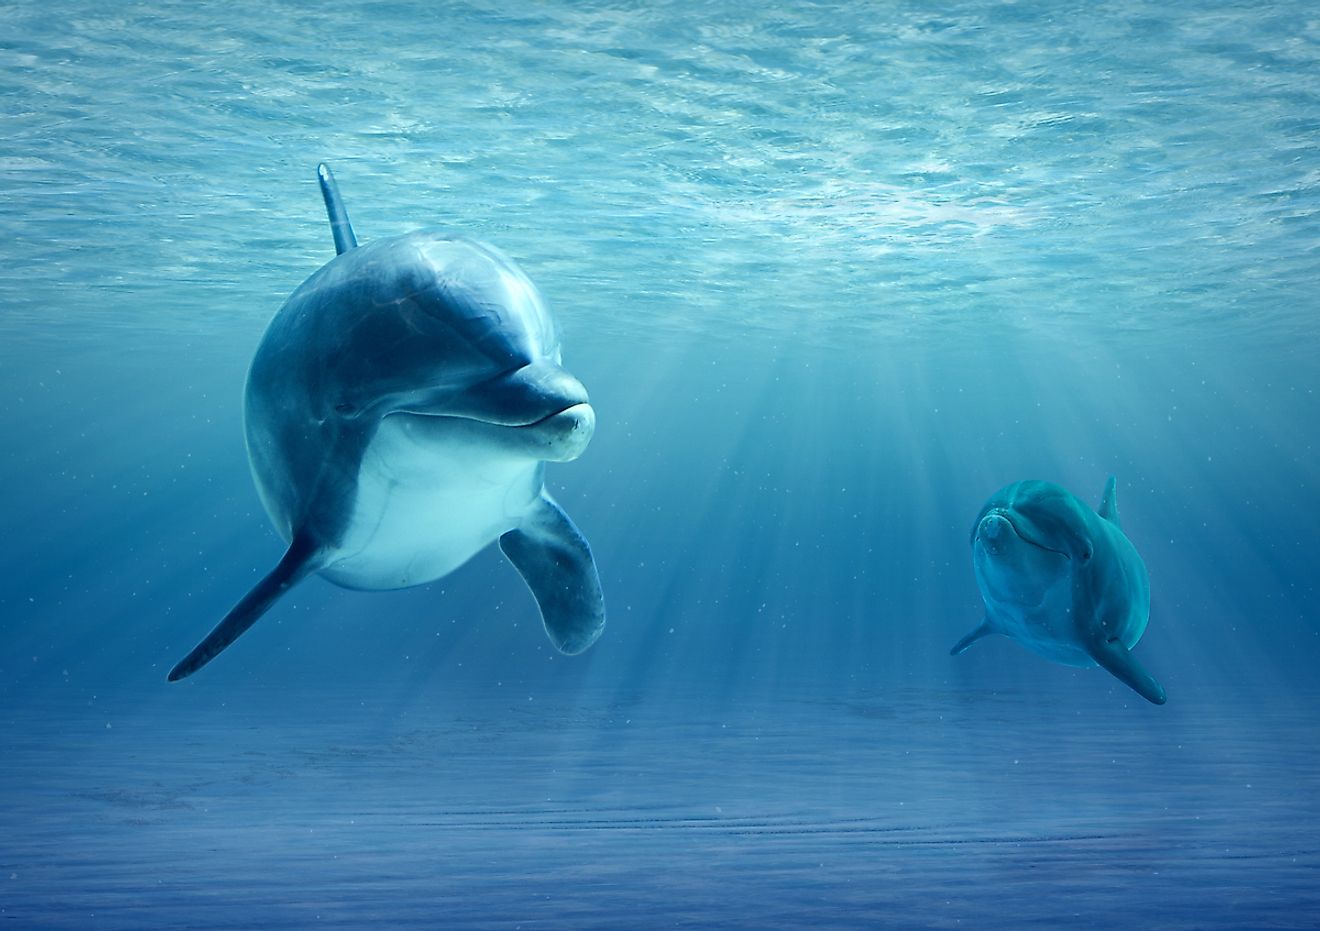 Two dolphins swimming together. Image credit: Marshalgonz/Shutterstock.com